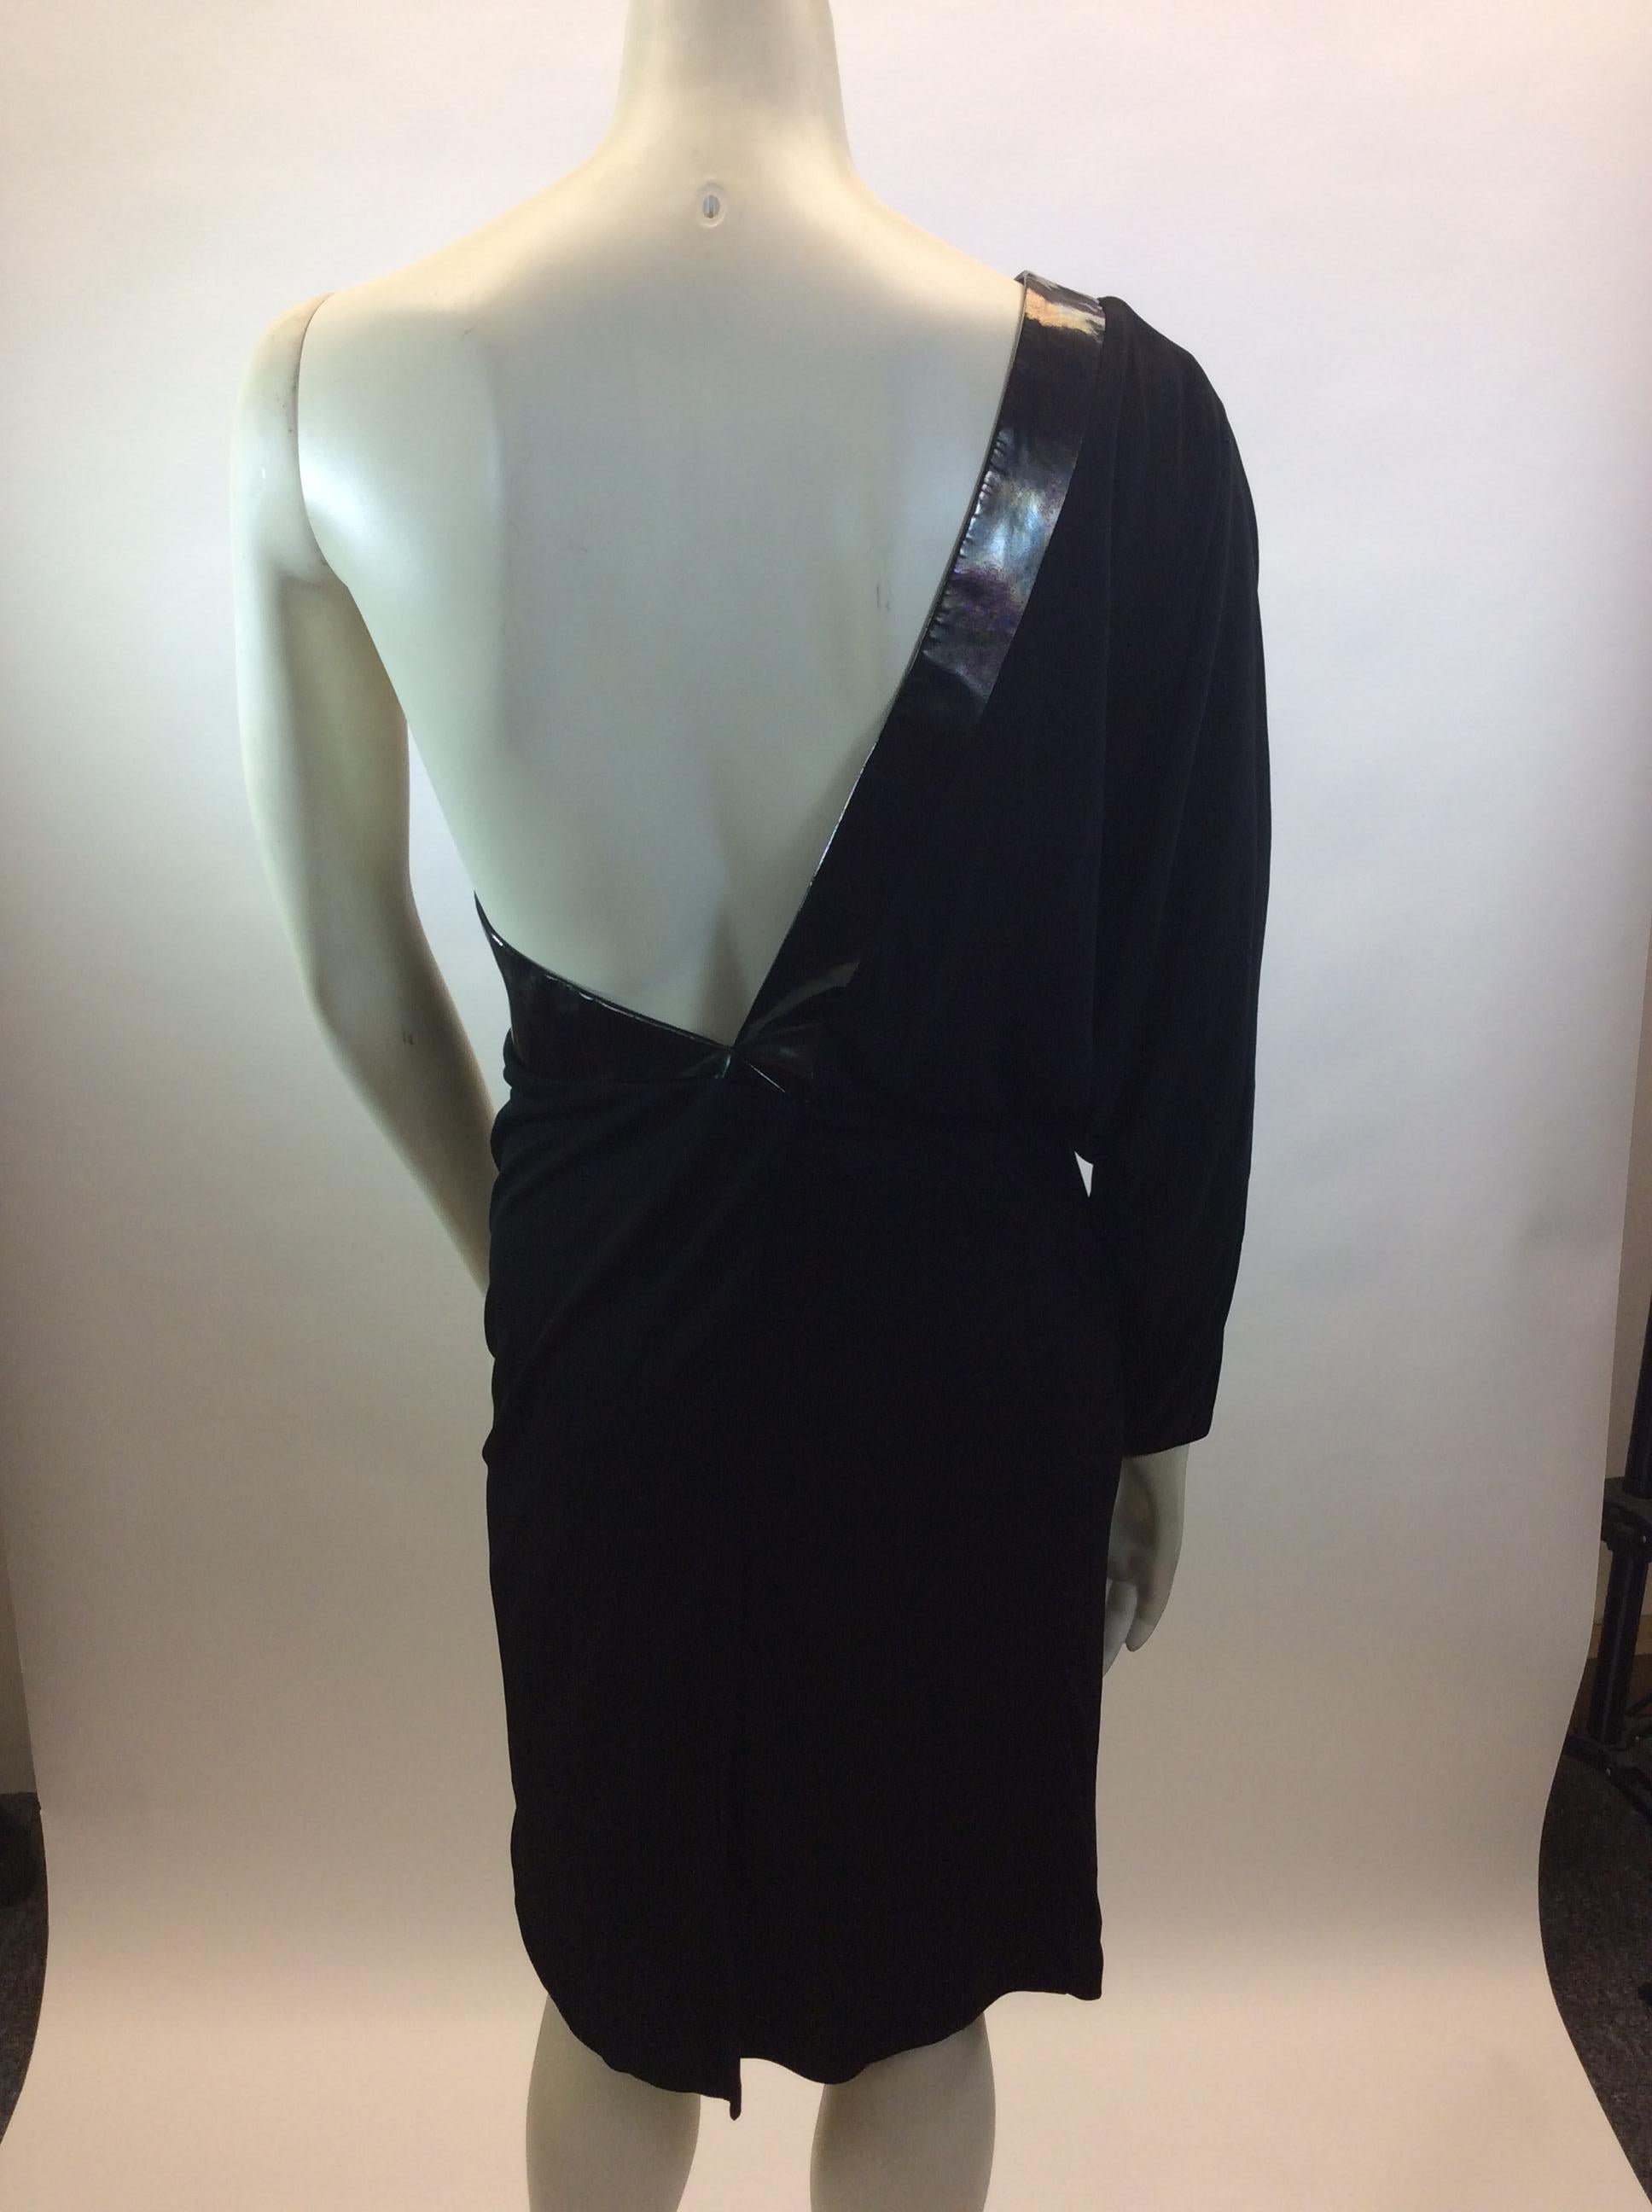 Gucci Black One Shoulder Dress with Leather Detail In Good Condition For Sale In Narberth, PA